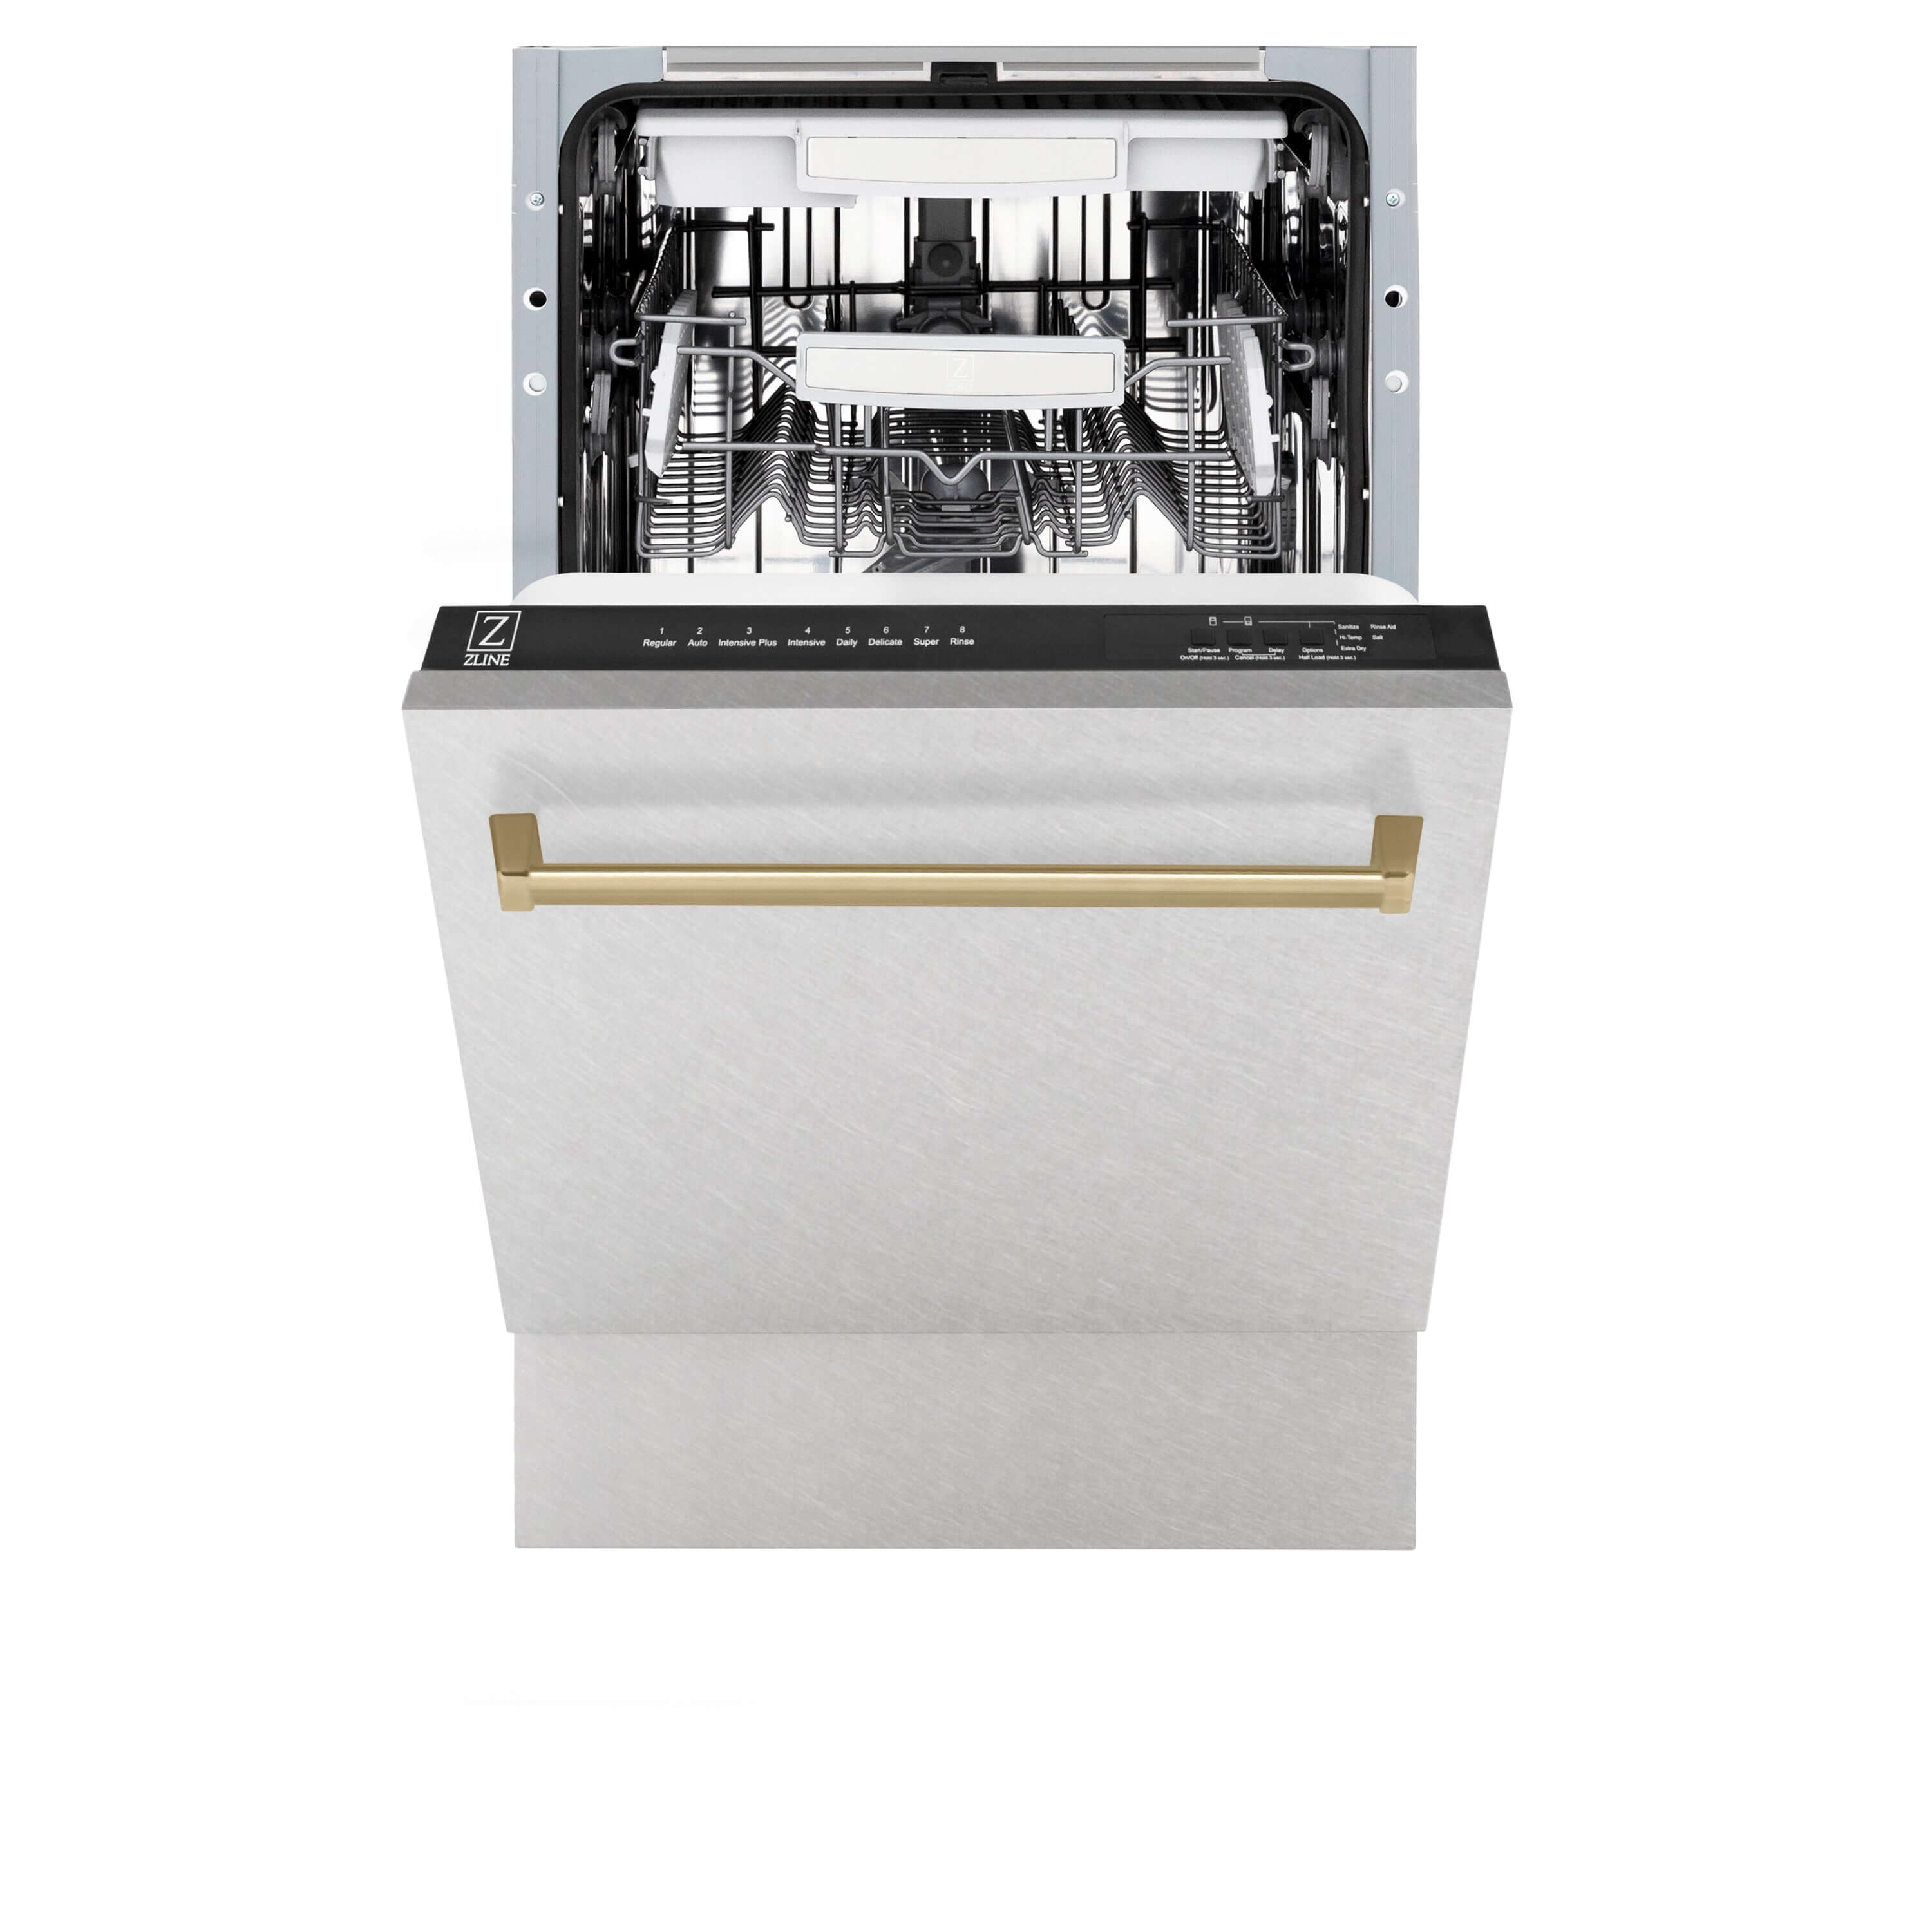 ZLINE Autograph Edition 18 in. Tallac Series 3rd Rack Top Control Built-In Dishwasher in Fingerprint Resistant Stainless Steel with Champagne Bronze Handle, 51dBa (DWVZ-SN-18-CB) front, half open.